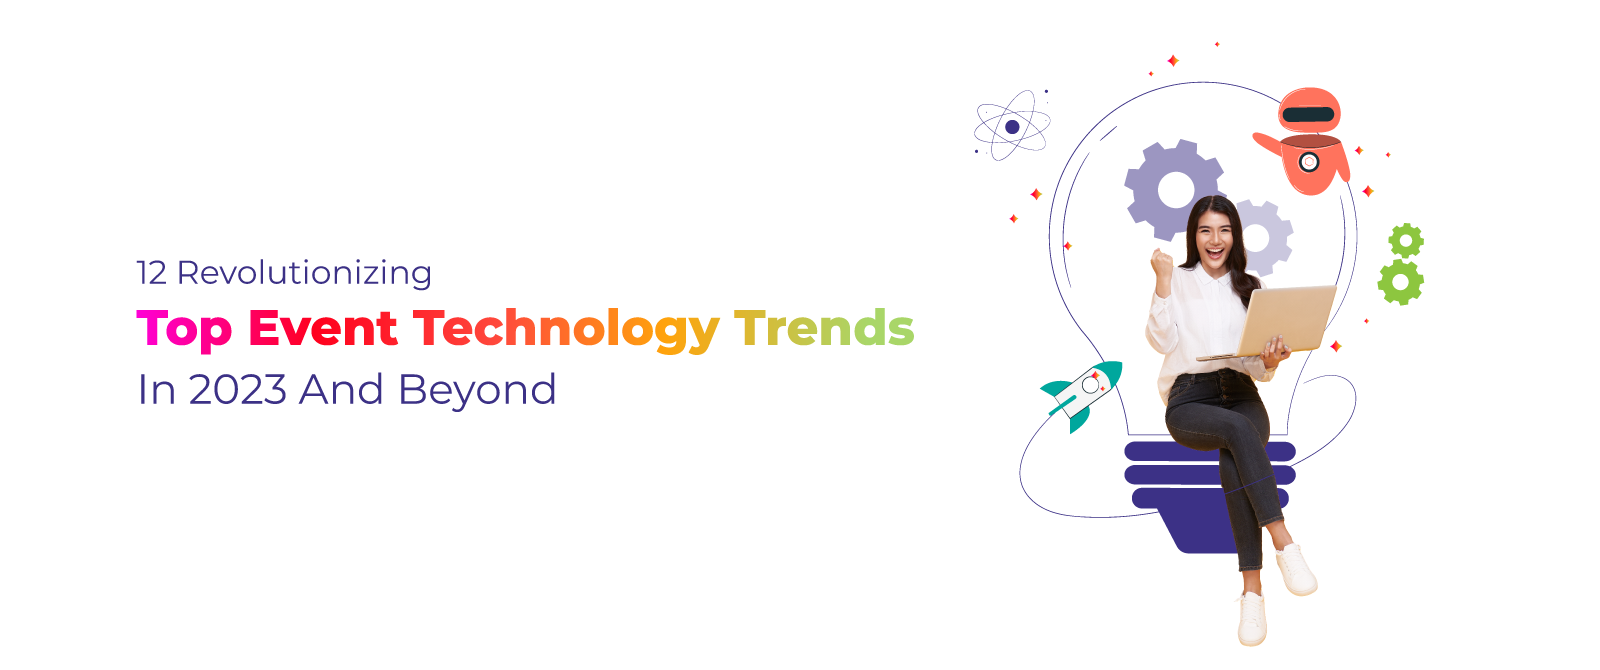 12 Revolutionizing Top Event Technology Trends in 2023 and Beyond